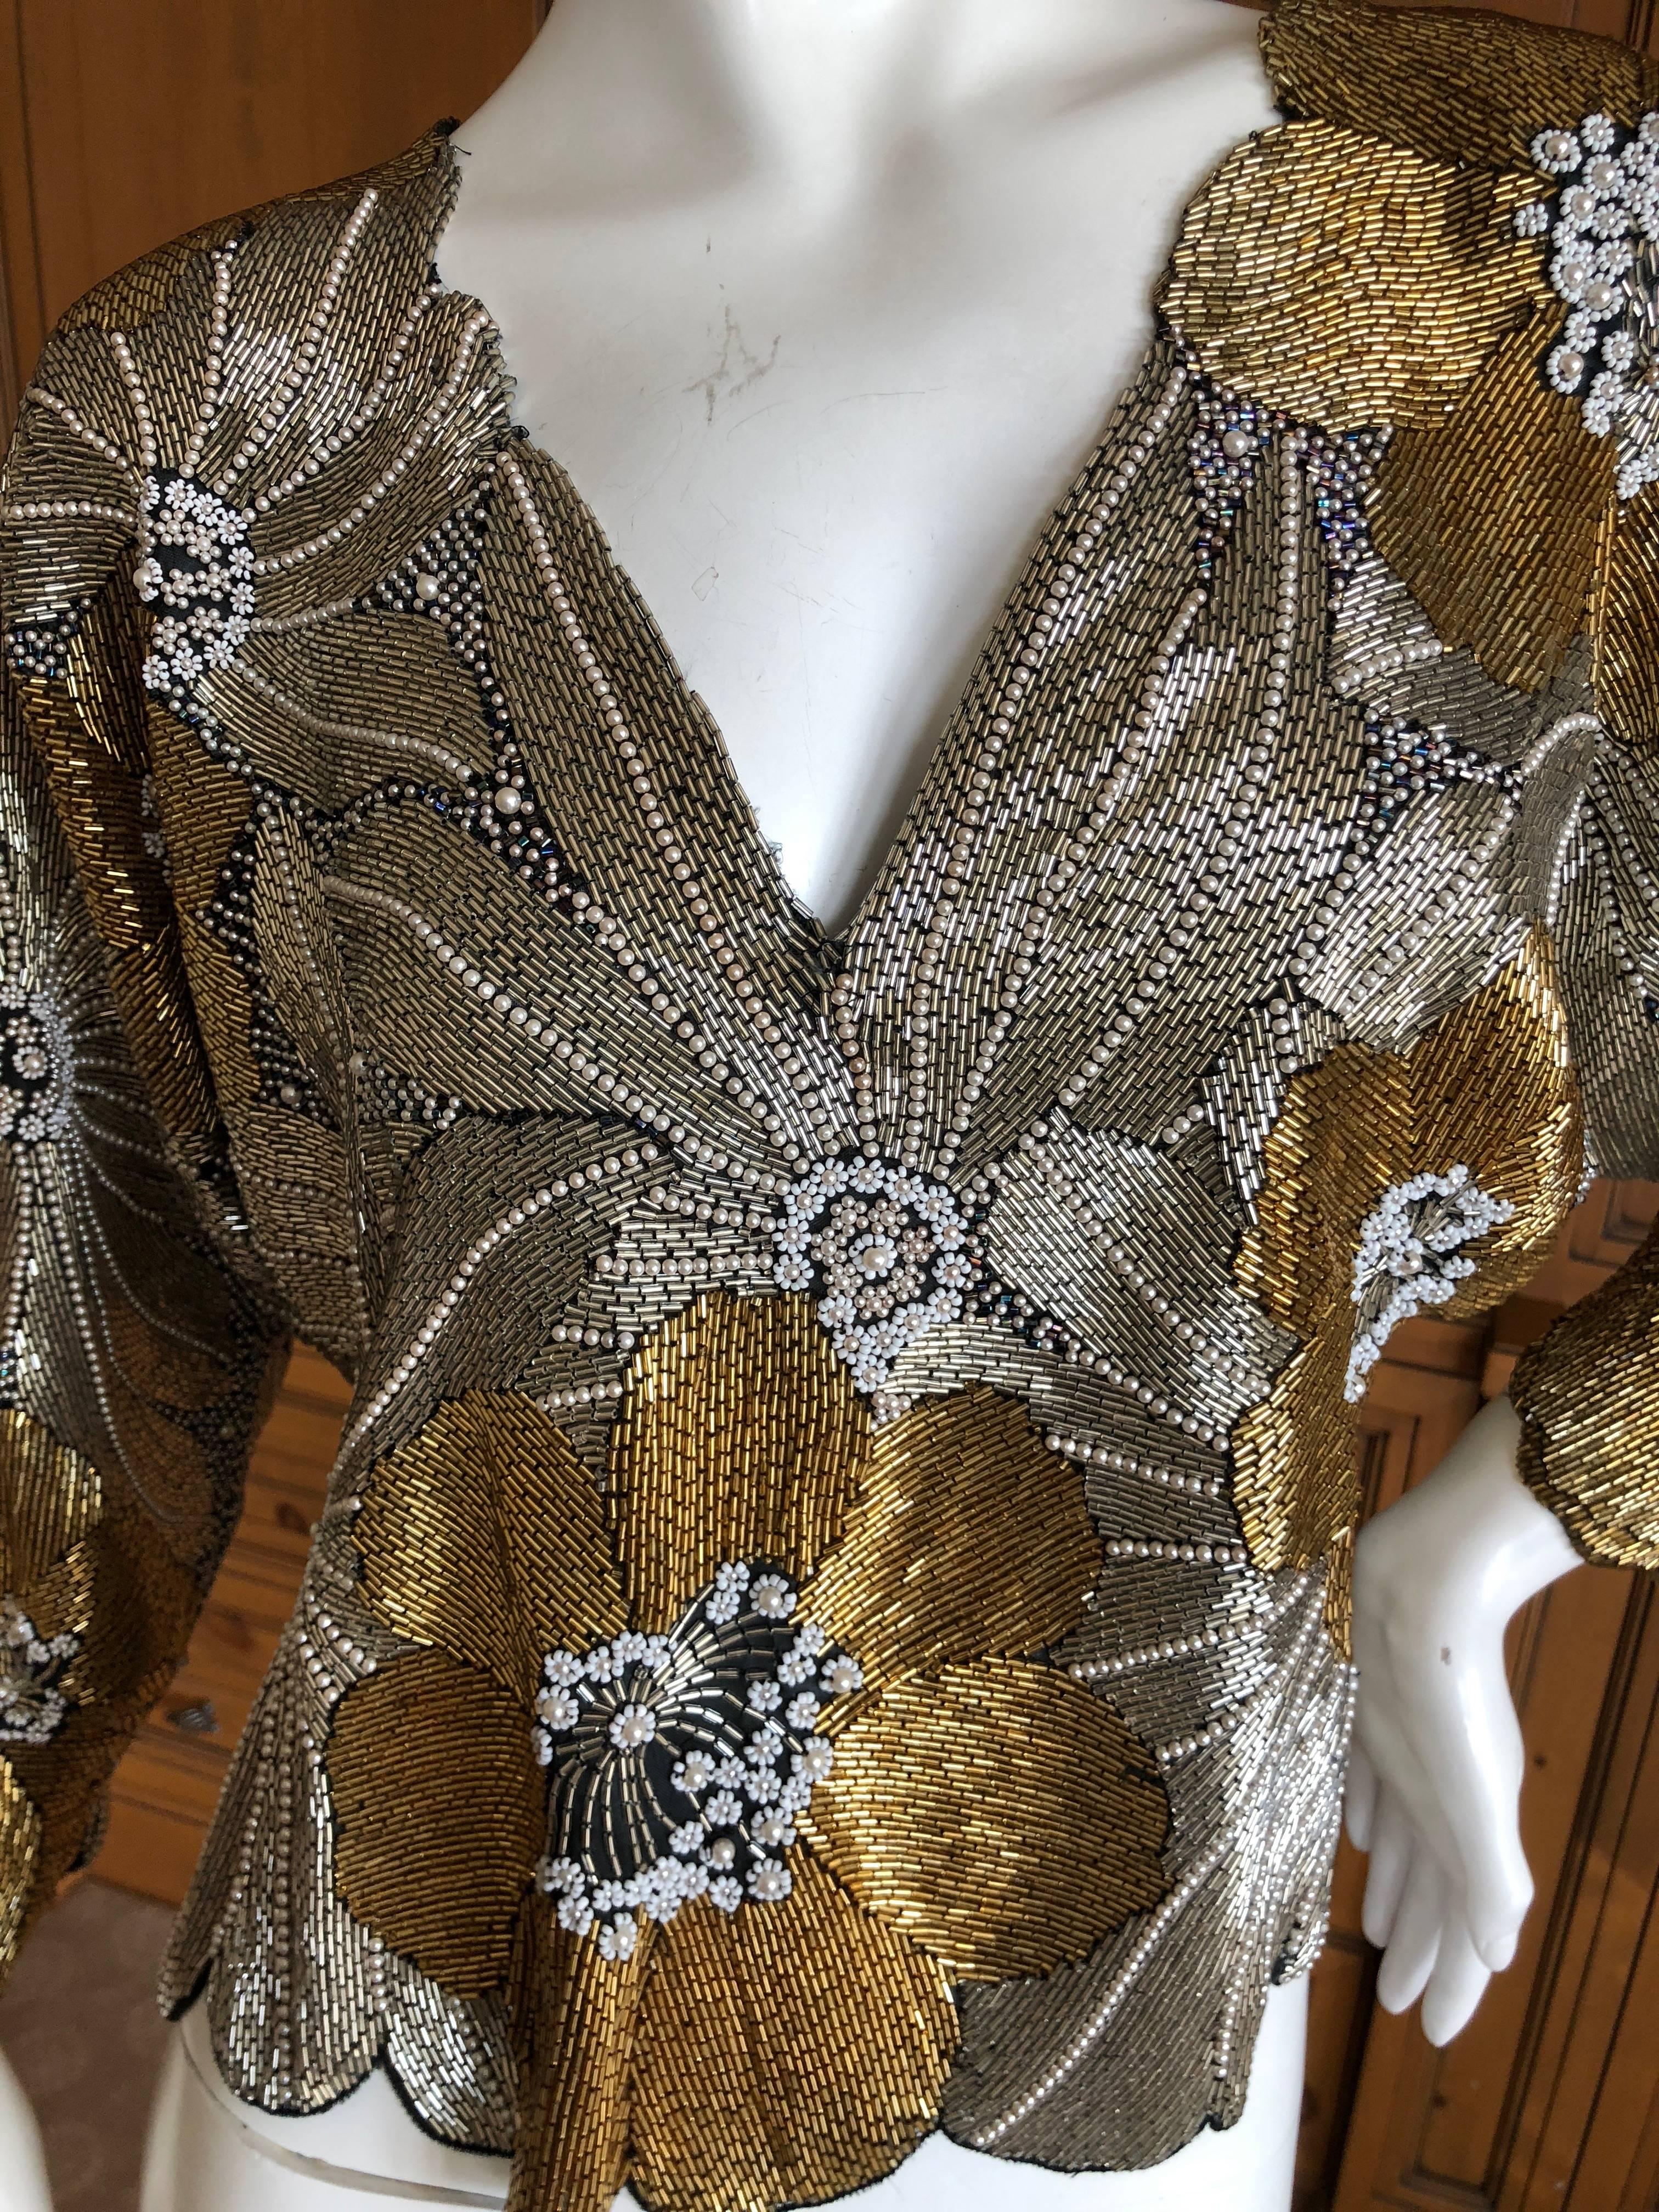 Halston 1970's Disco Era Gold Bugle Bead and Pearl Embellished Top For Sale 1